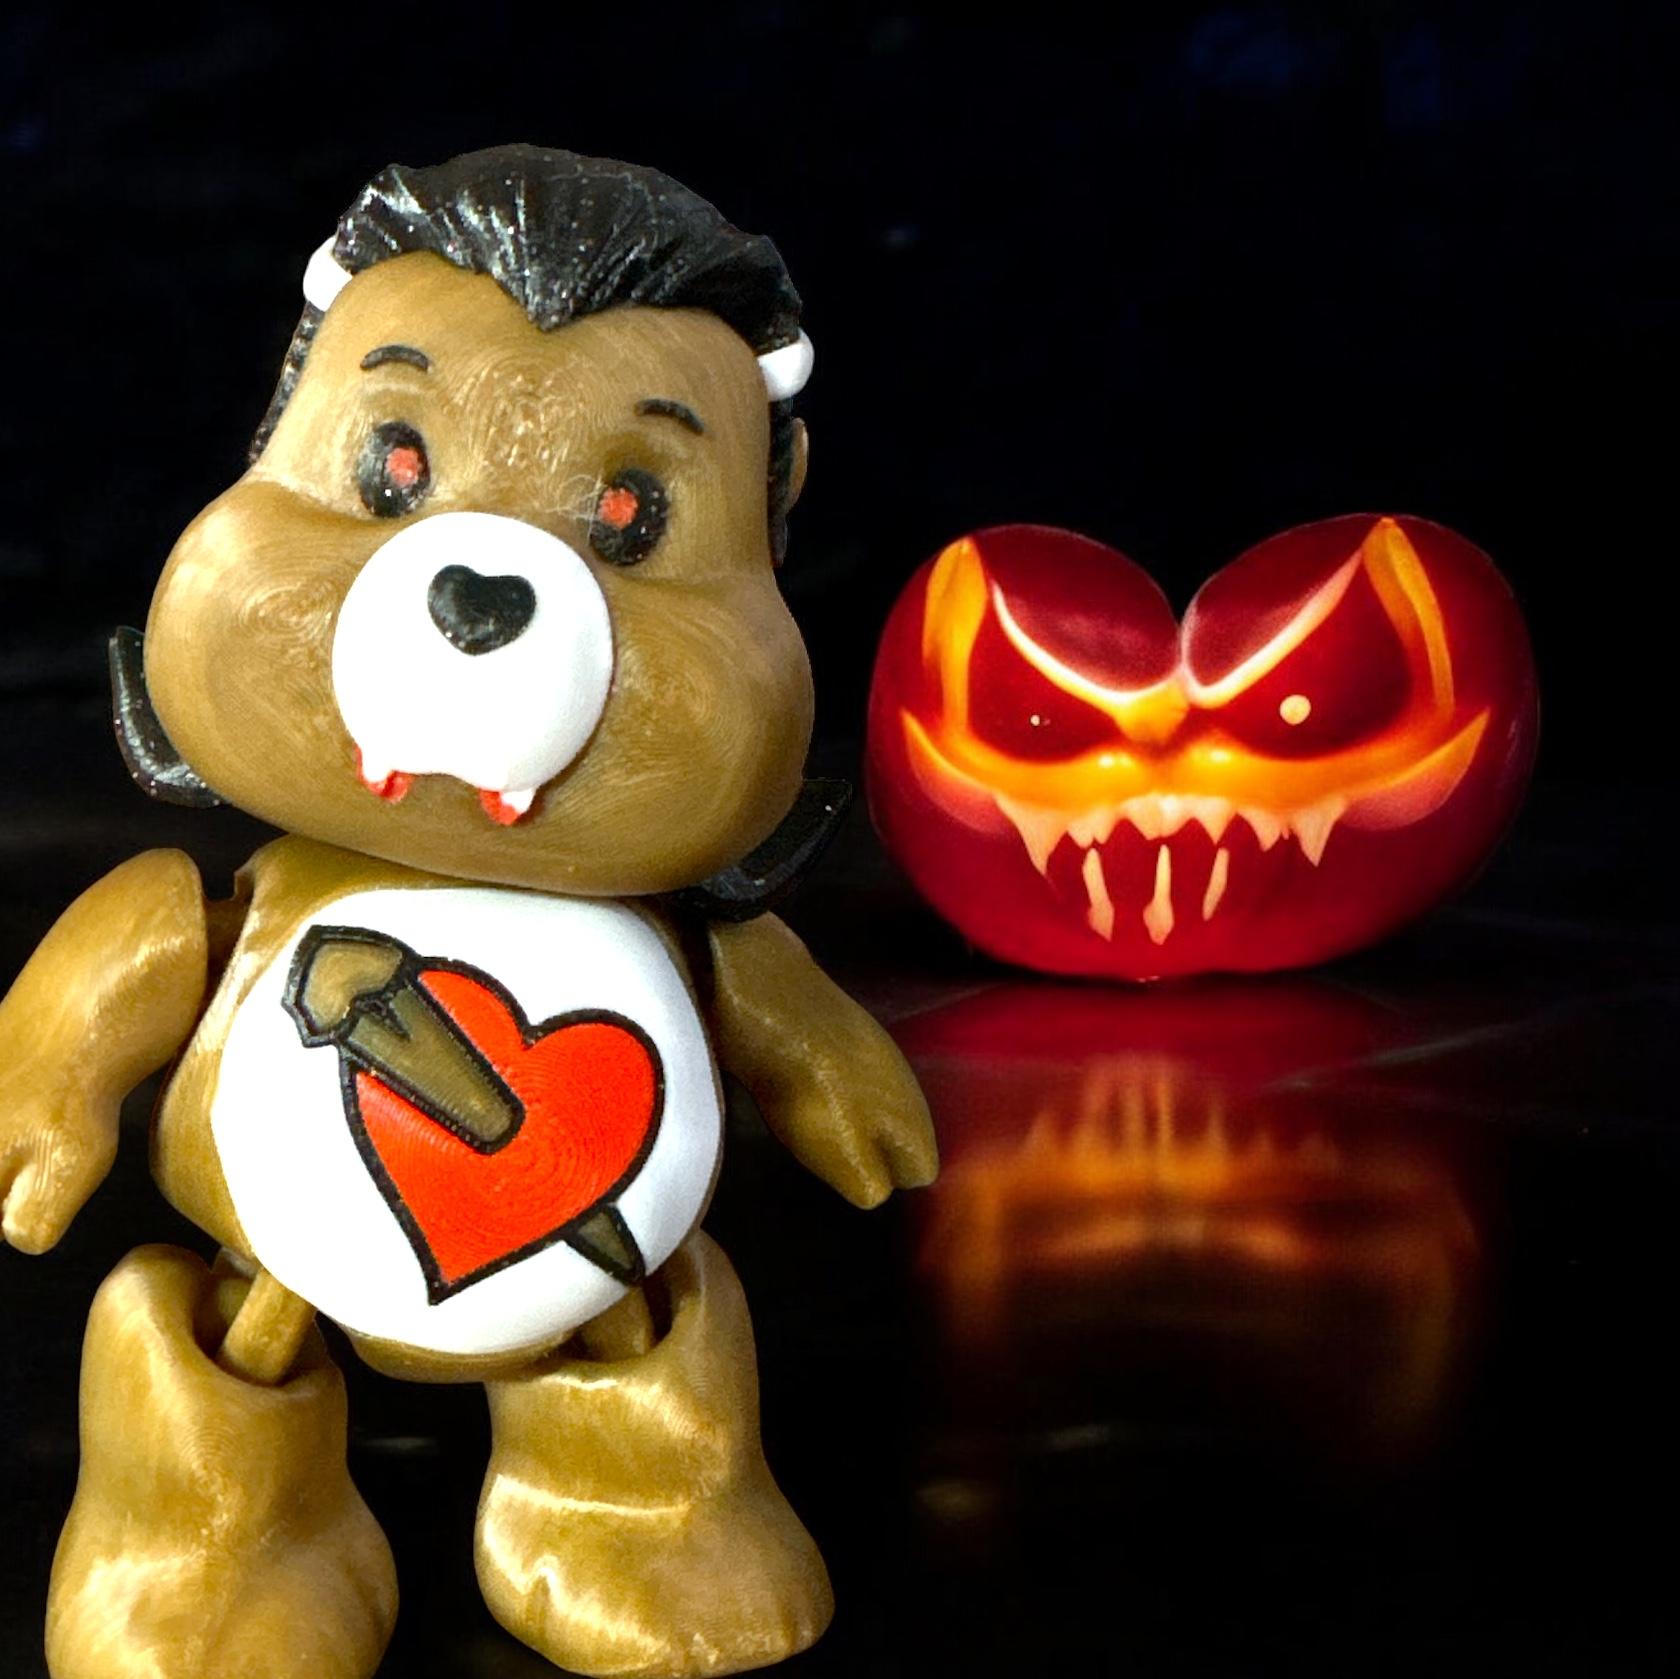 Dracula, Vampire, Care Bear, Print in Place, Articulated, Flexi, Flexible, Toy, Halloween Series.  3d model